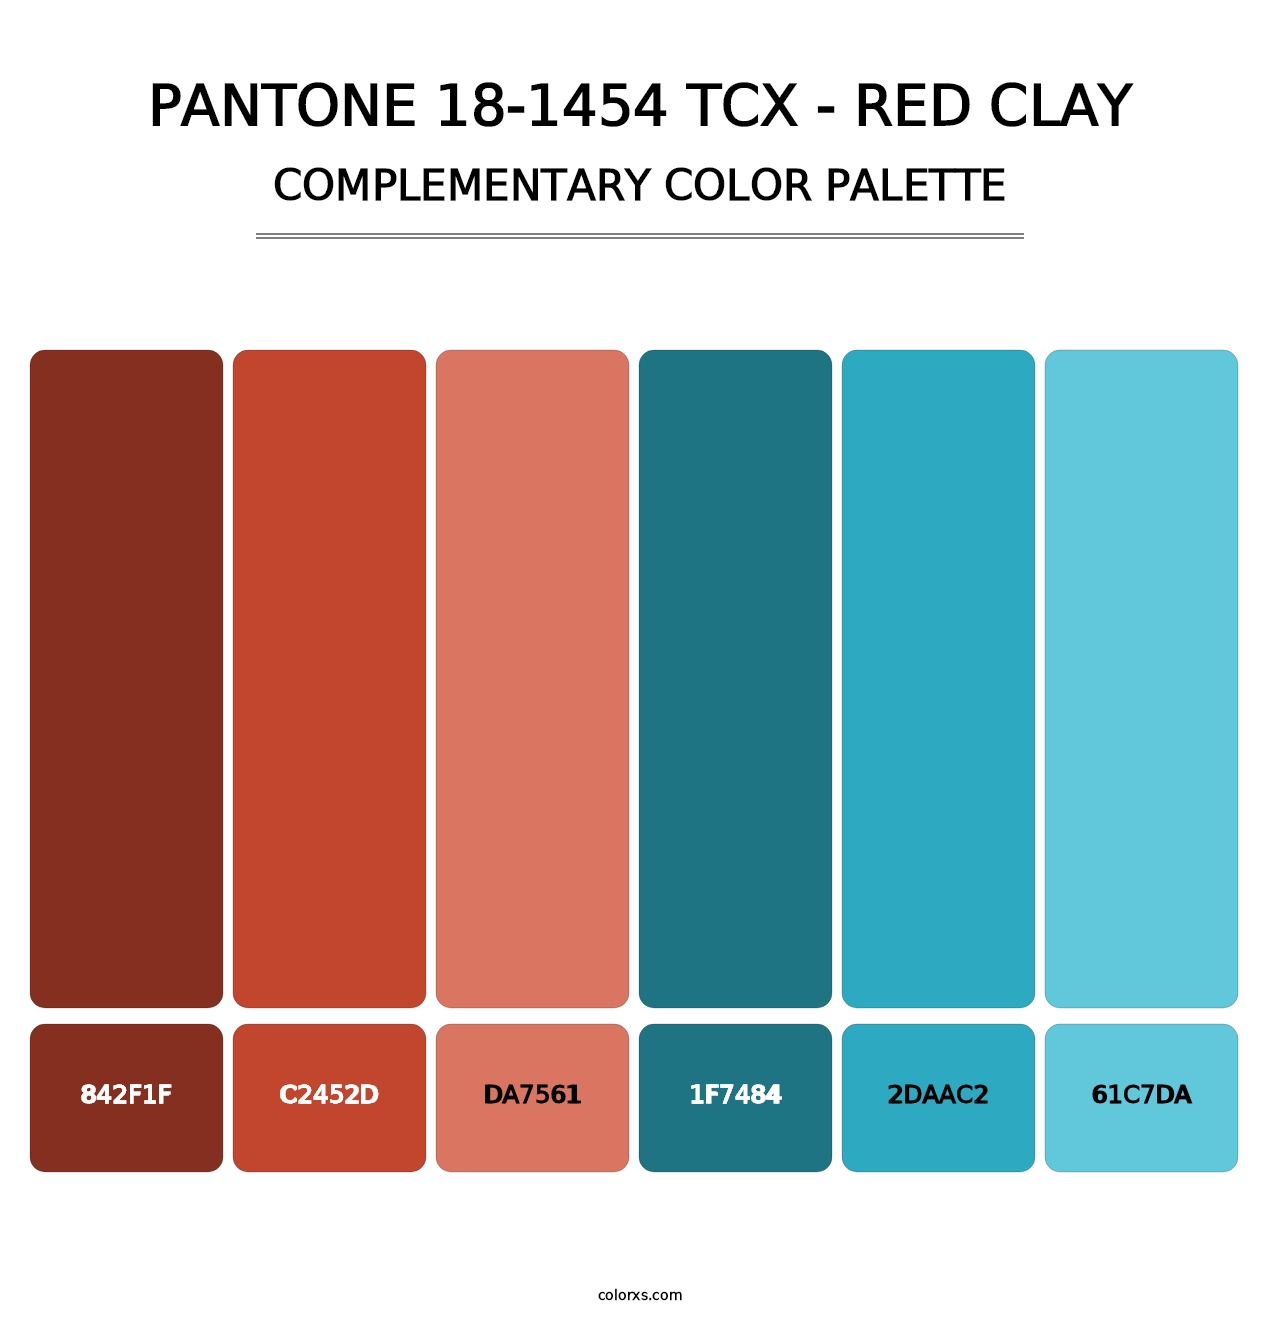 PANTONE 18-1454 TCX - Red Clay - Complementary Color Palette